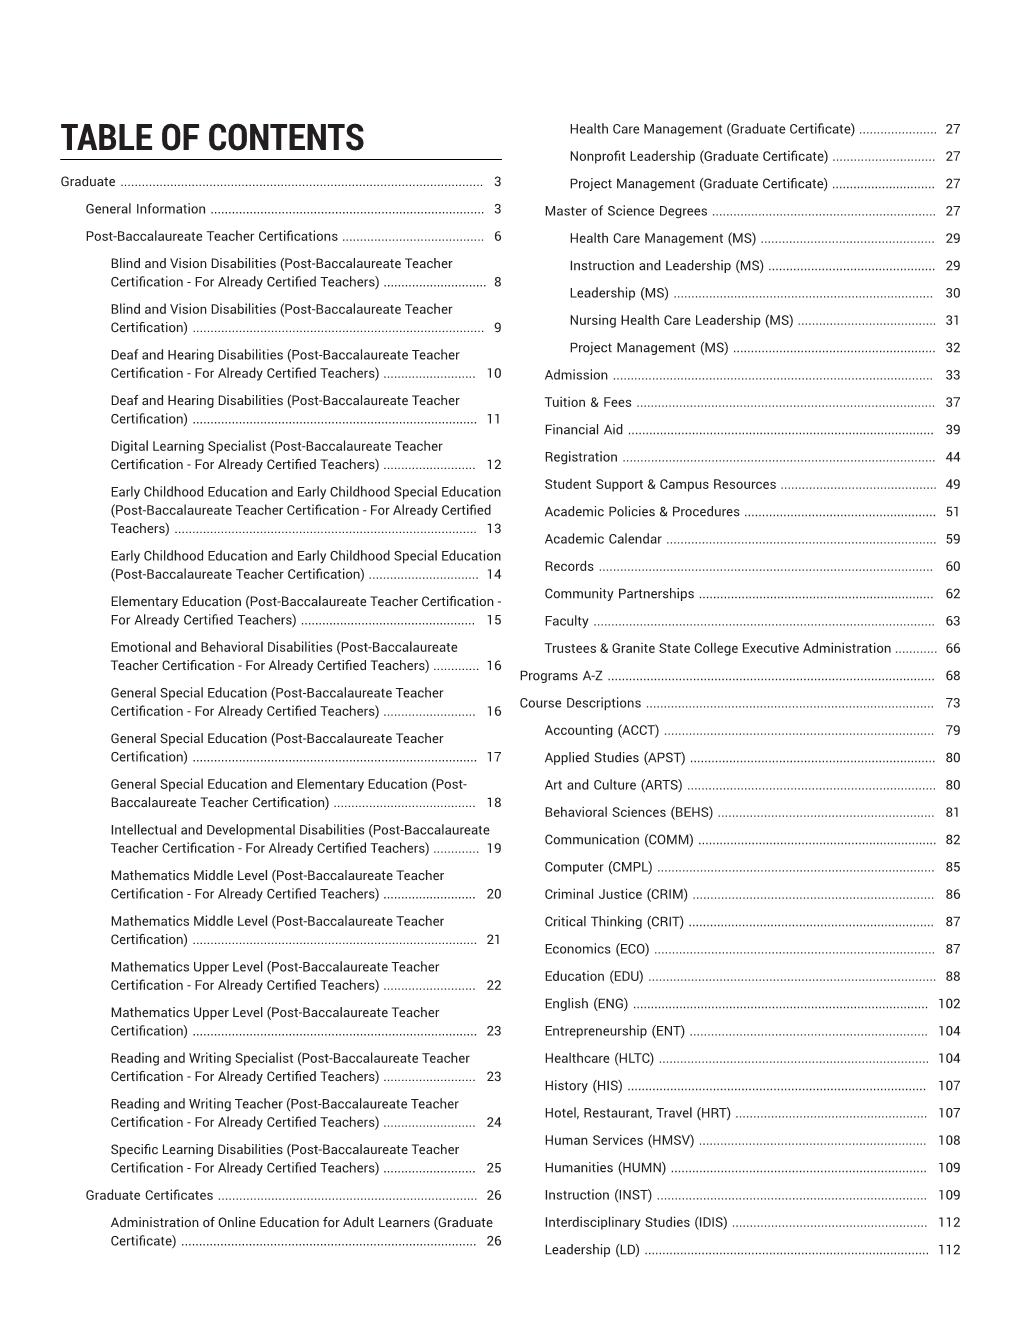 TABLE of CONTENTS Nonproﬁt Leadership (Graduate Certiﬁcate)